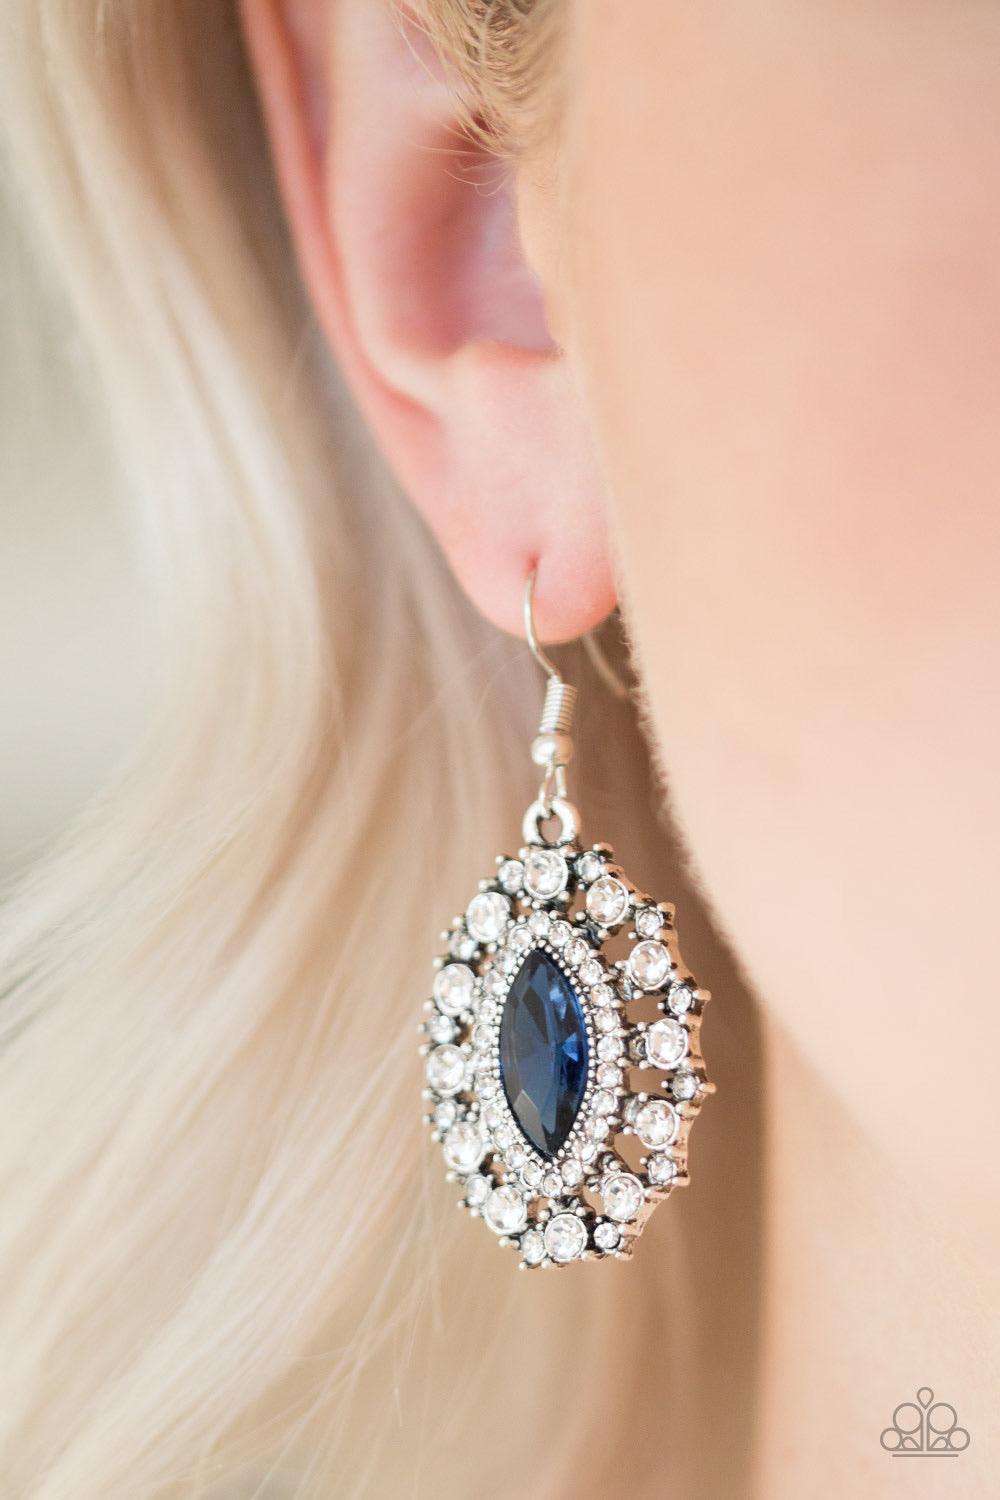 Paparazzi Accessories Long May She Reign - Blue Featuring a regal marquise style cut, a glittery blue rhinestone is pressed into a studded silver frame radiating with glassy white rhinestones for a timeless look. Earring attaches to a standard fishhook fi